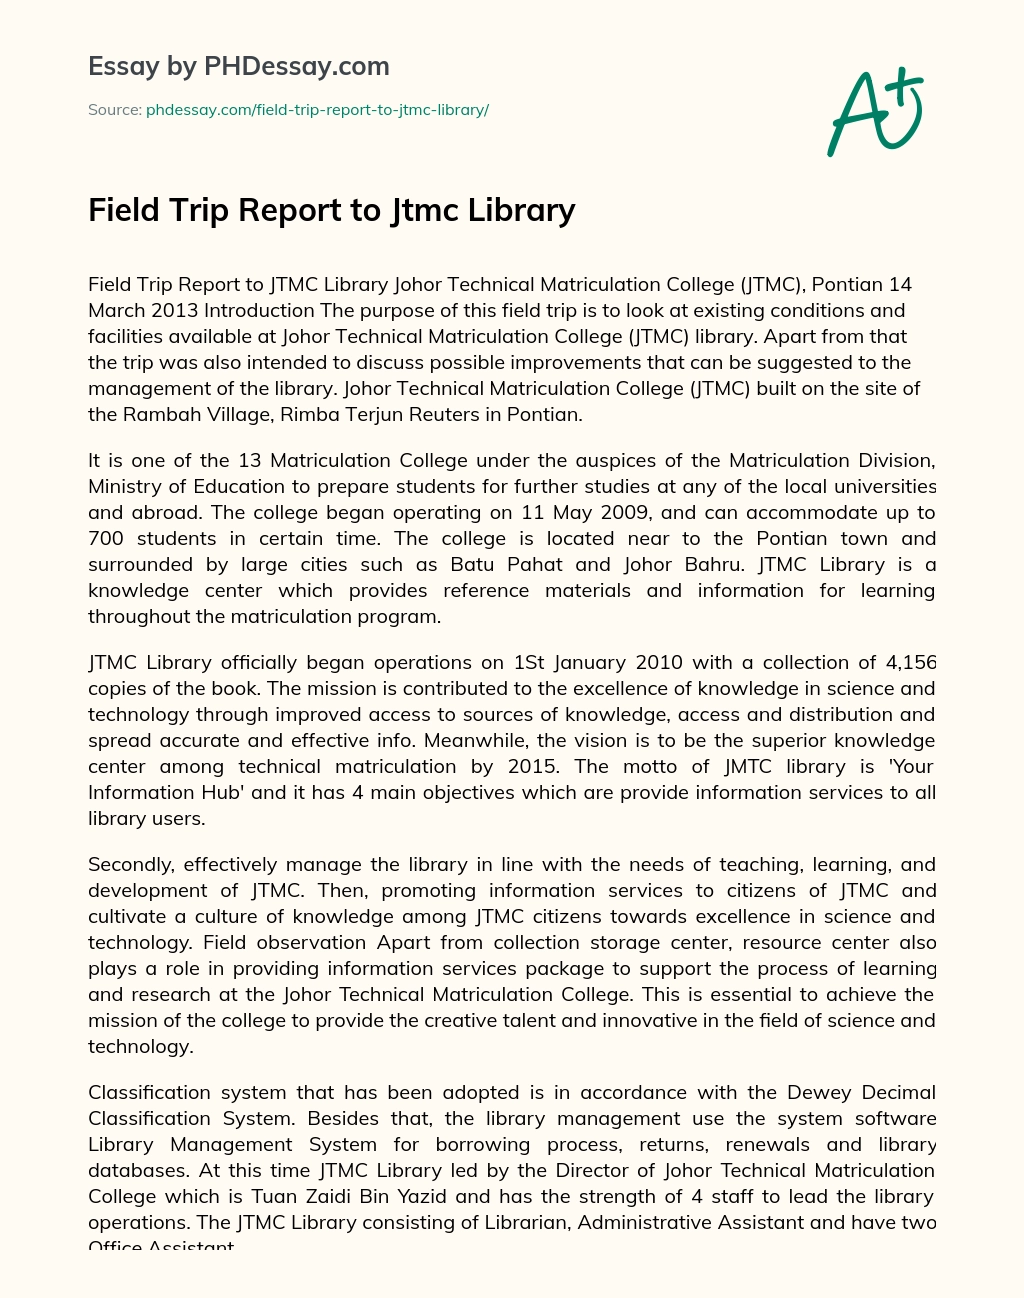 Field Trip Report to Jtmc Library essay